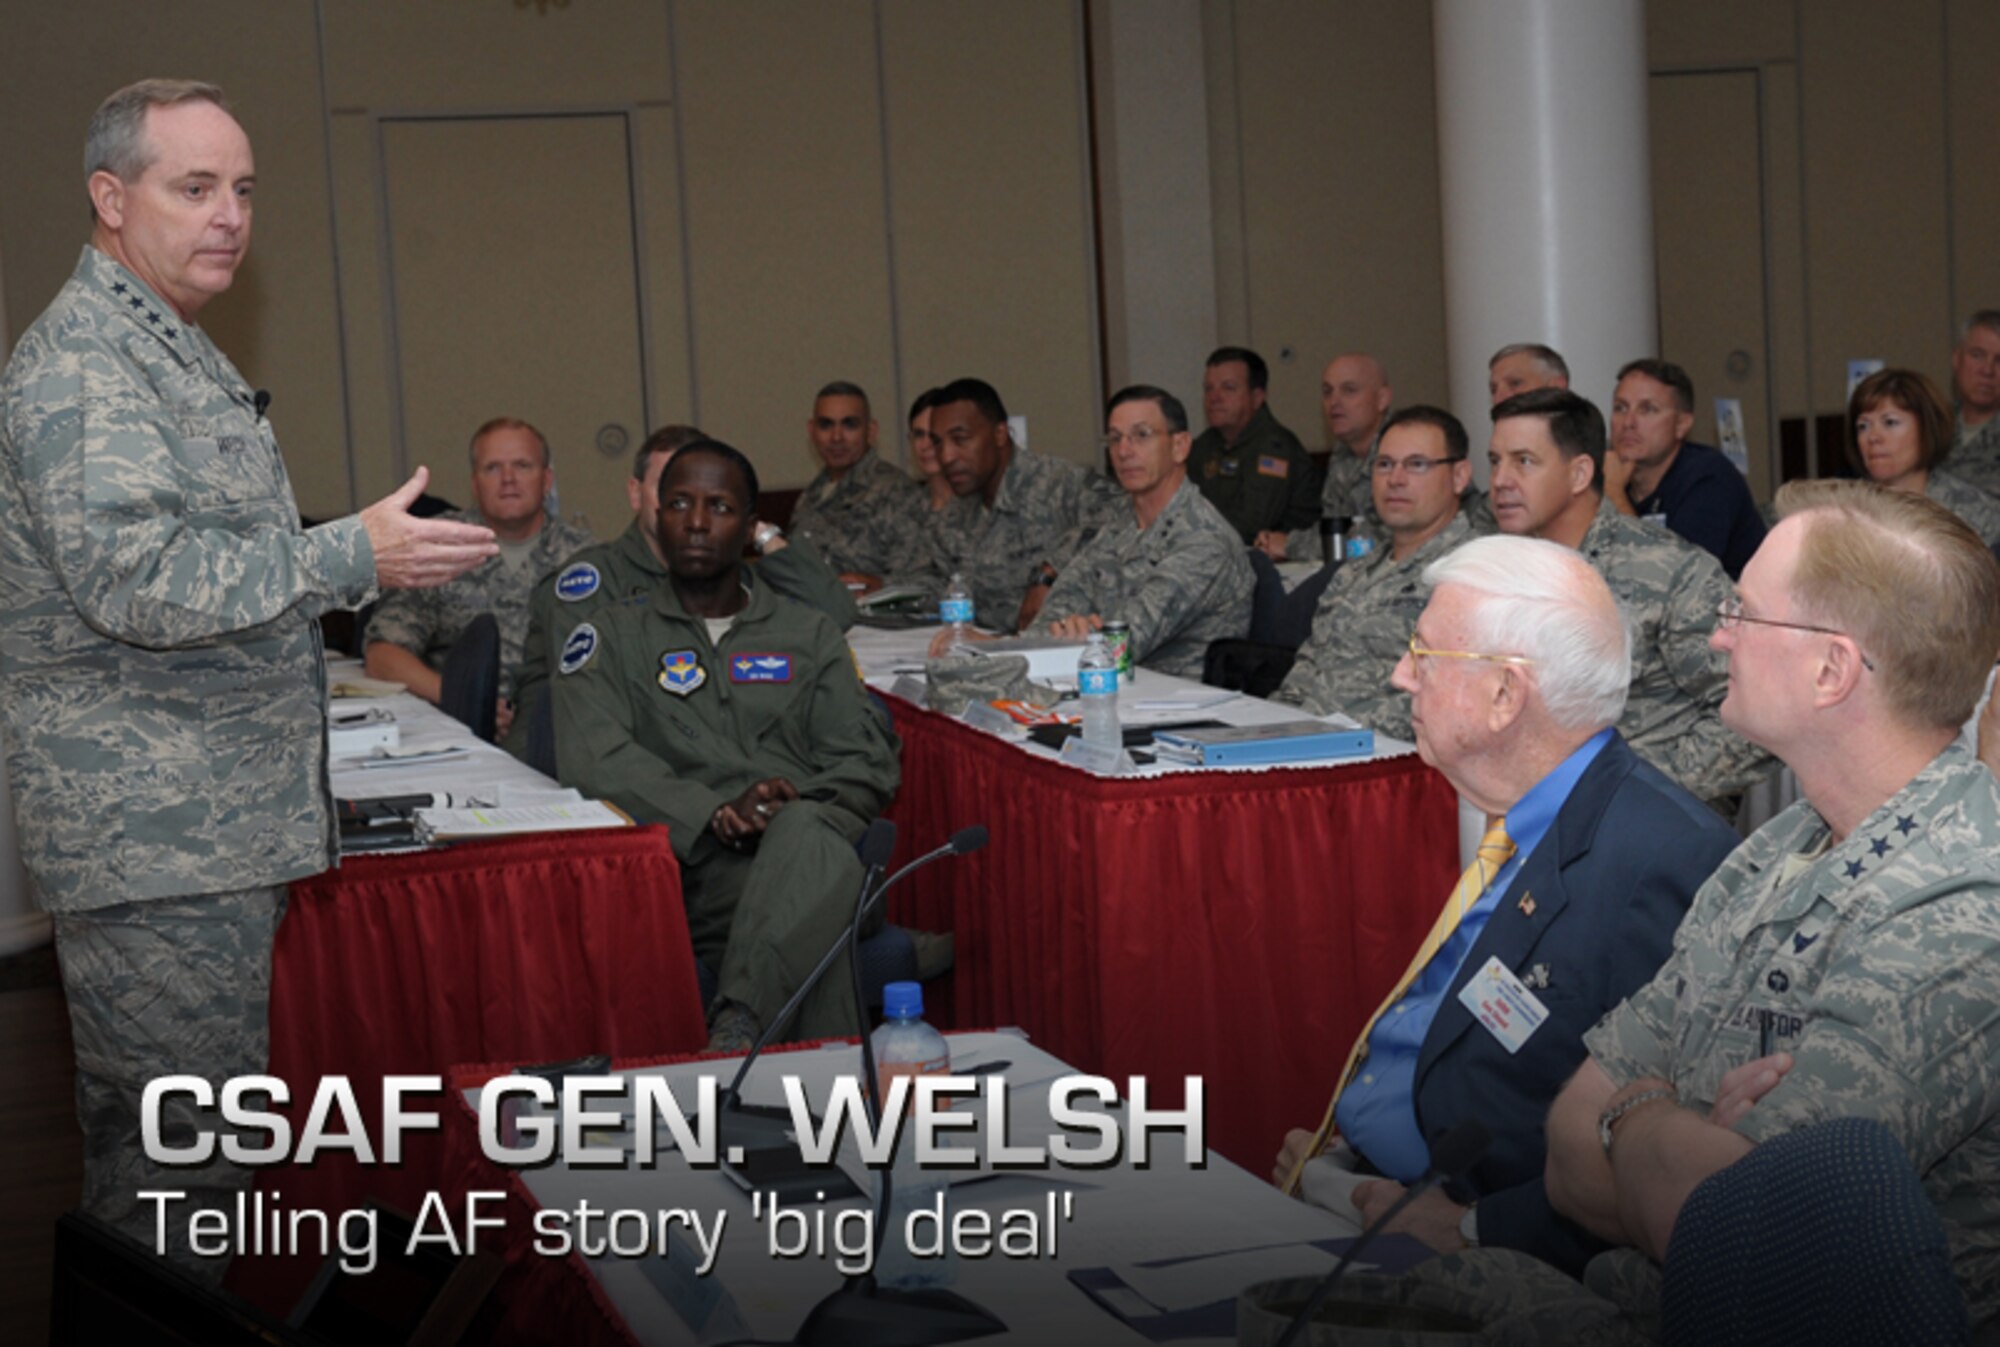 Air Force Chief of Staff Gen. Mark A. Welsh III speaks to Air Education and Training Command leaders during the AETC Senior Leader Conference Oct. 18, 2012. In addition to being a guest speaker at the conference, Welsh visited Basic Military Training at Joint Base San Antonio-Lackland and participated in a BMT graduation as the reviewing official. (U.S. Air Force photo/Joel Martinez)
